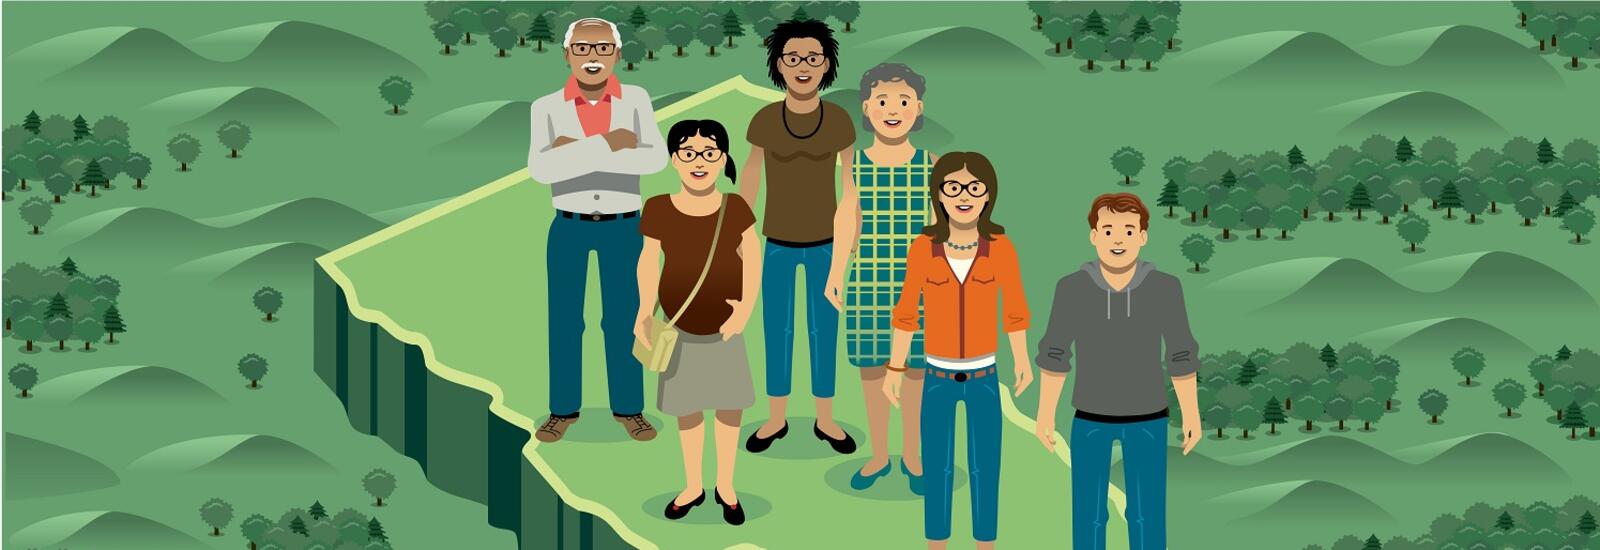 Illustration of people standing on a map of Vermont surrounded by green forest.